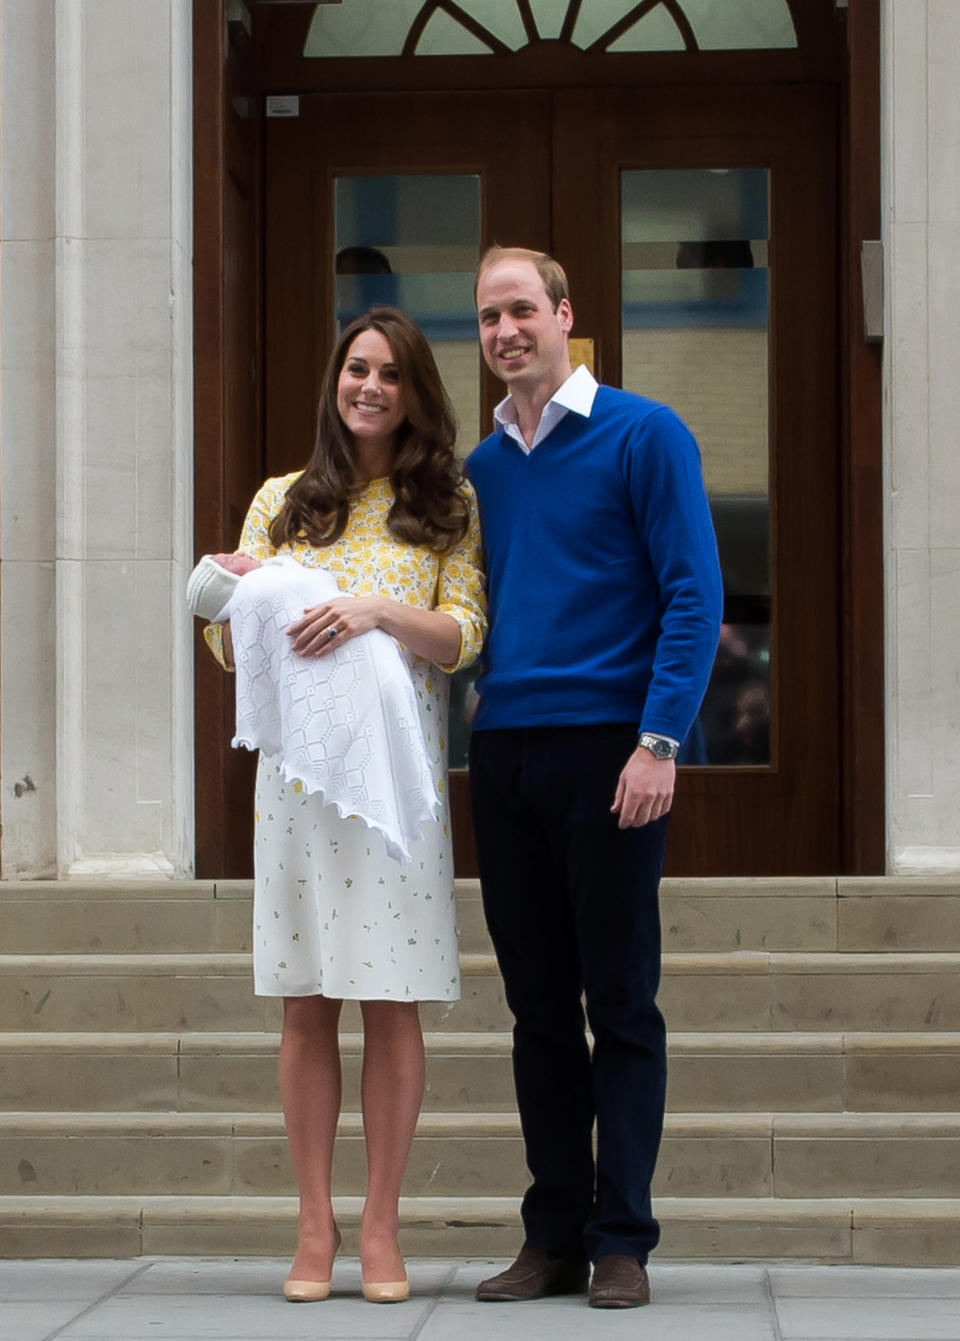 The Duke and Duchess of Cambridge photographed outside the Lindo Wing with their second child, Princess Charlotte, on 2 May 2015. (Getty Images)